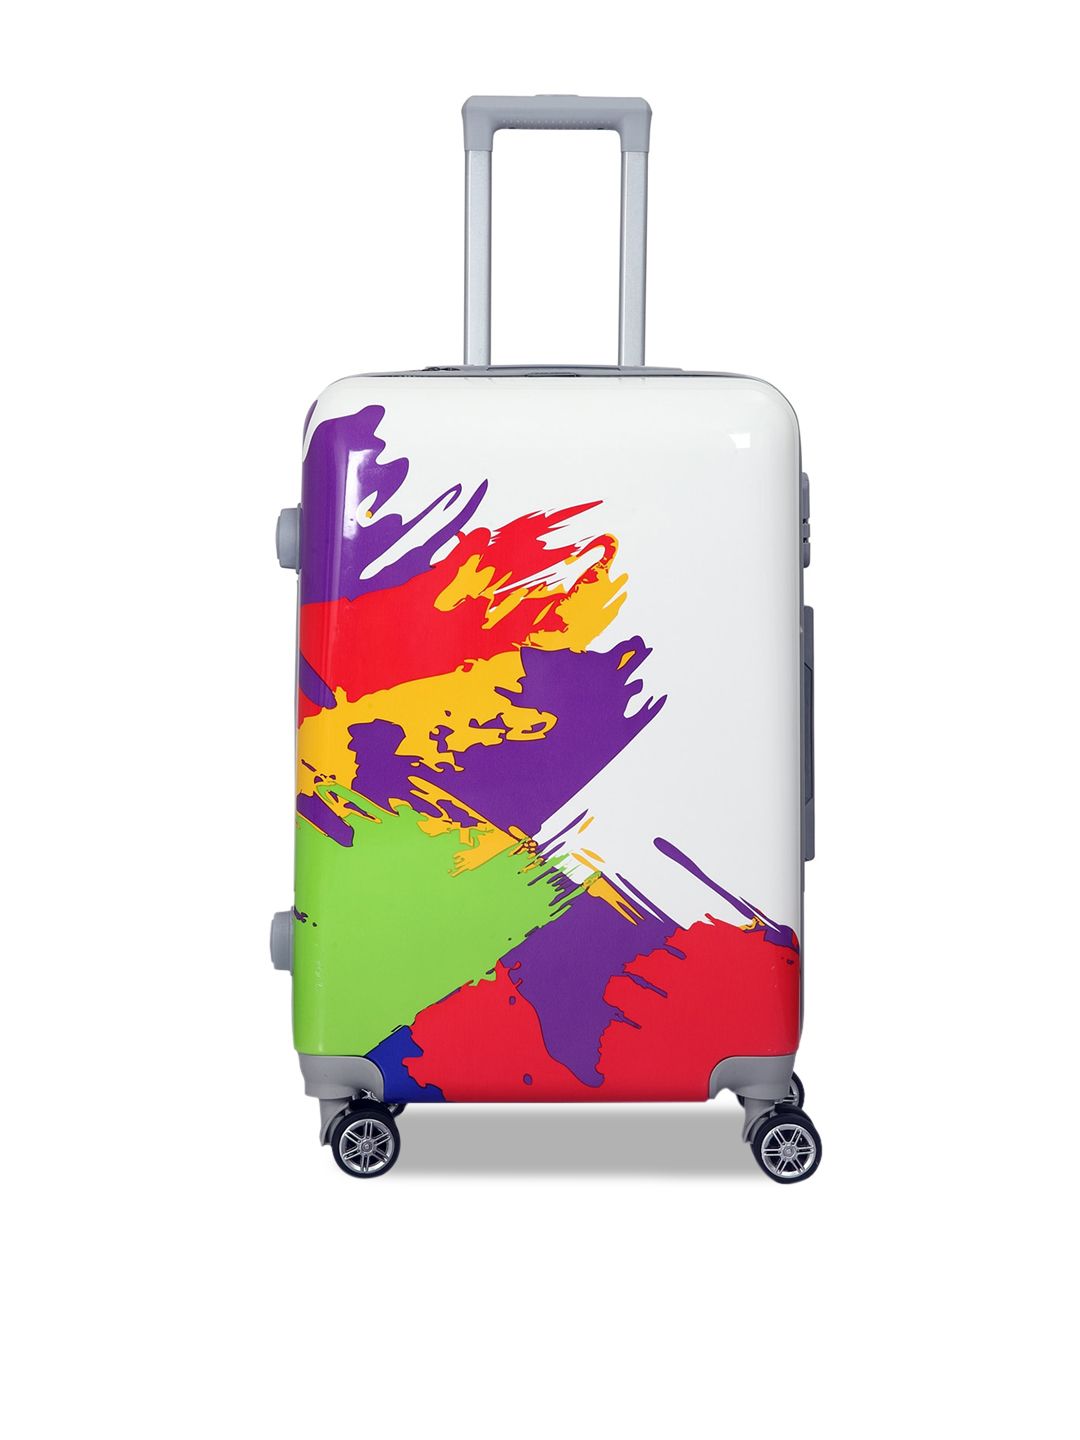 Polo Class White & Violet Printed Hard-Sided Medium Trolley Suitcase Price in India